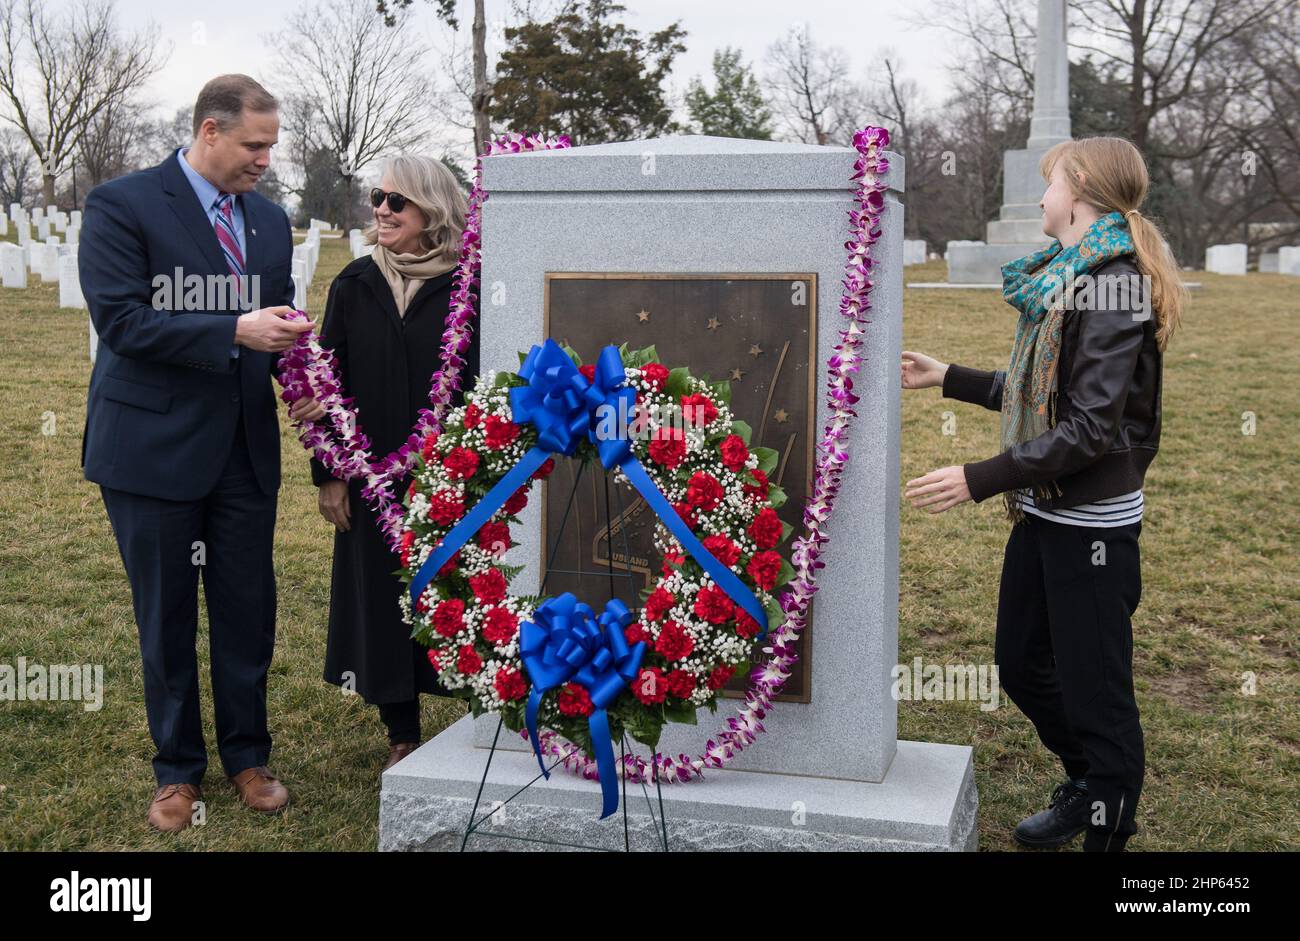 NASA Administrator Jim Bridenstine, left, helps place a lei at the Space Shuttle Columbia Memorial with Kristy Carroll, center, and daughter Vivian Carroll, who were friends of Space Shuttle Columbia pilot William McCool, during NASA's Day of Remembrance, Thursday, Feb. 7, 2019, at Arlington National Cemetery in Arlington, Va. Stock Photo